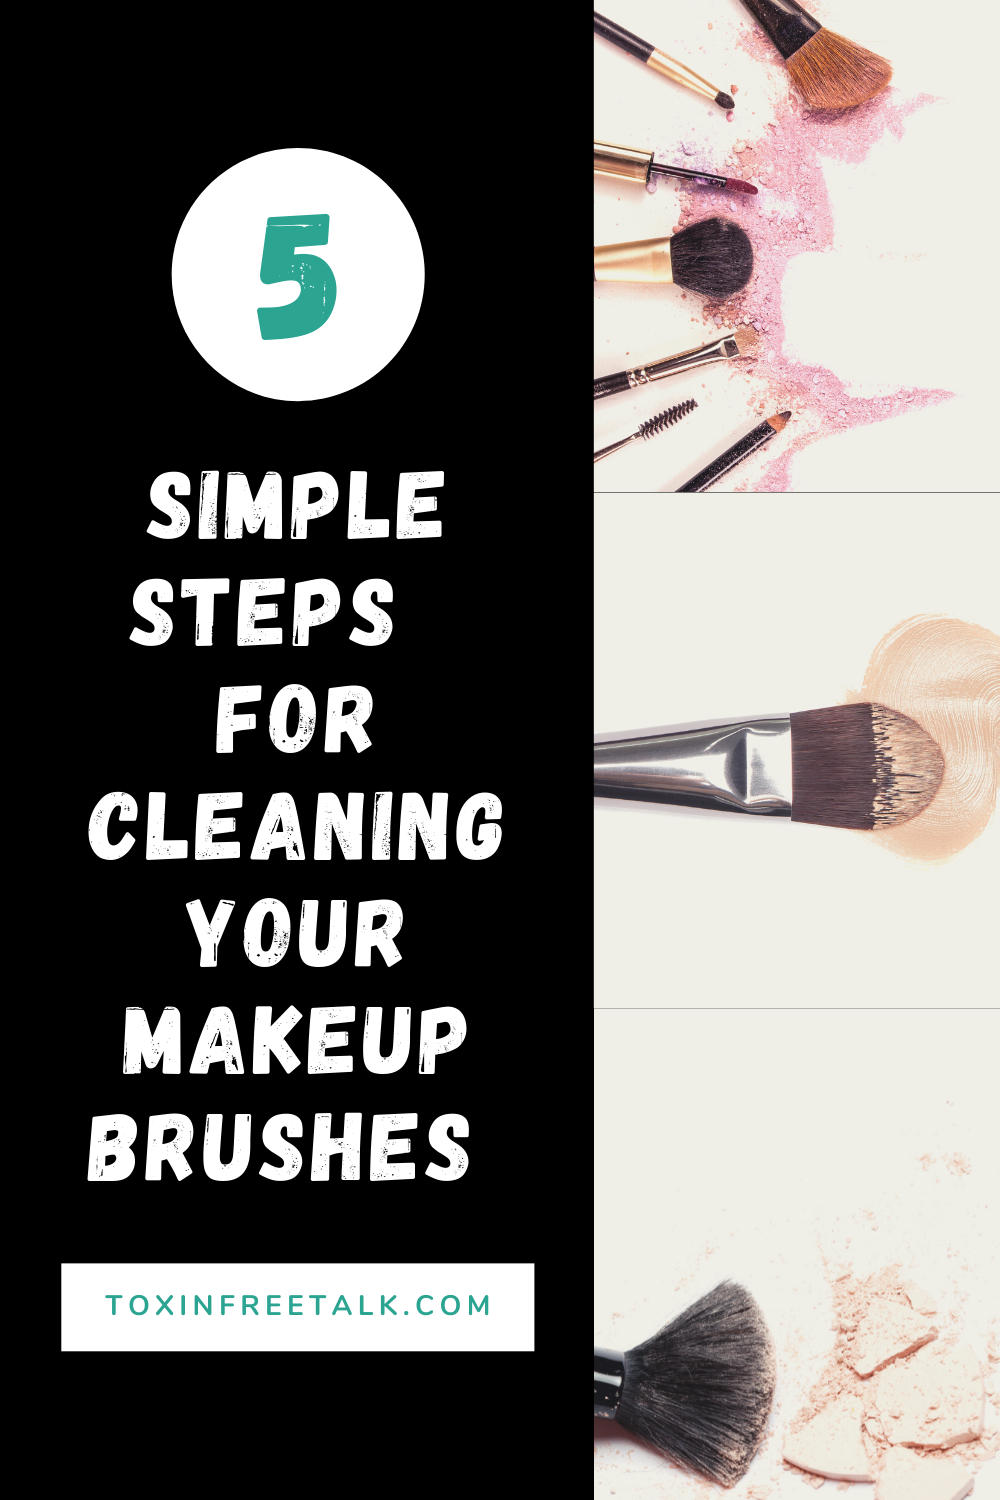 Makeup Brush Cleaners For Longevity of Your Makeup Brushes - Times